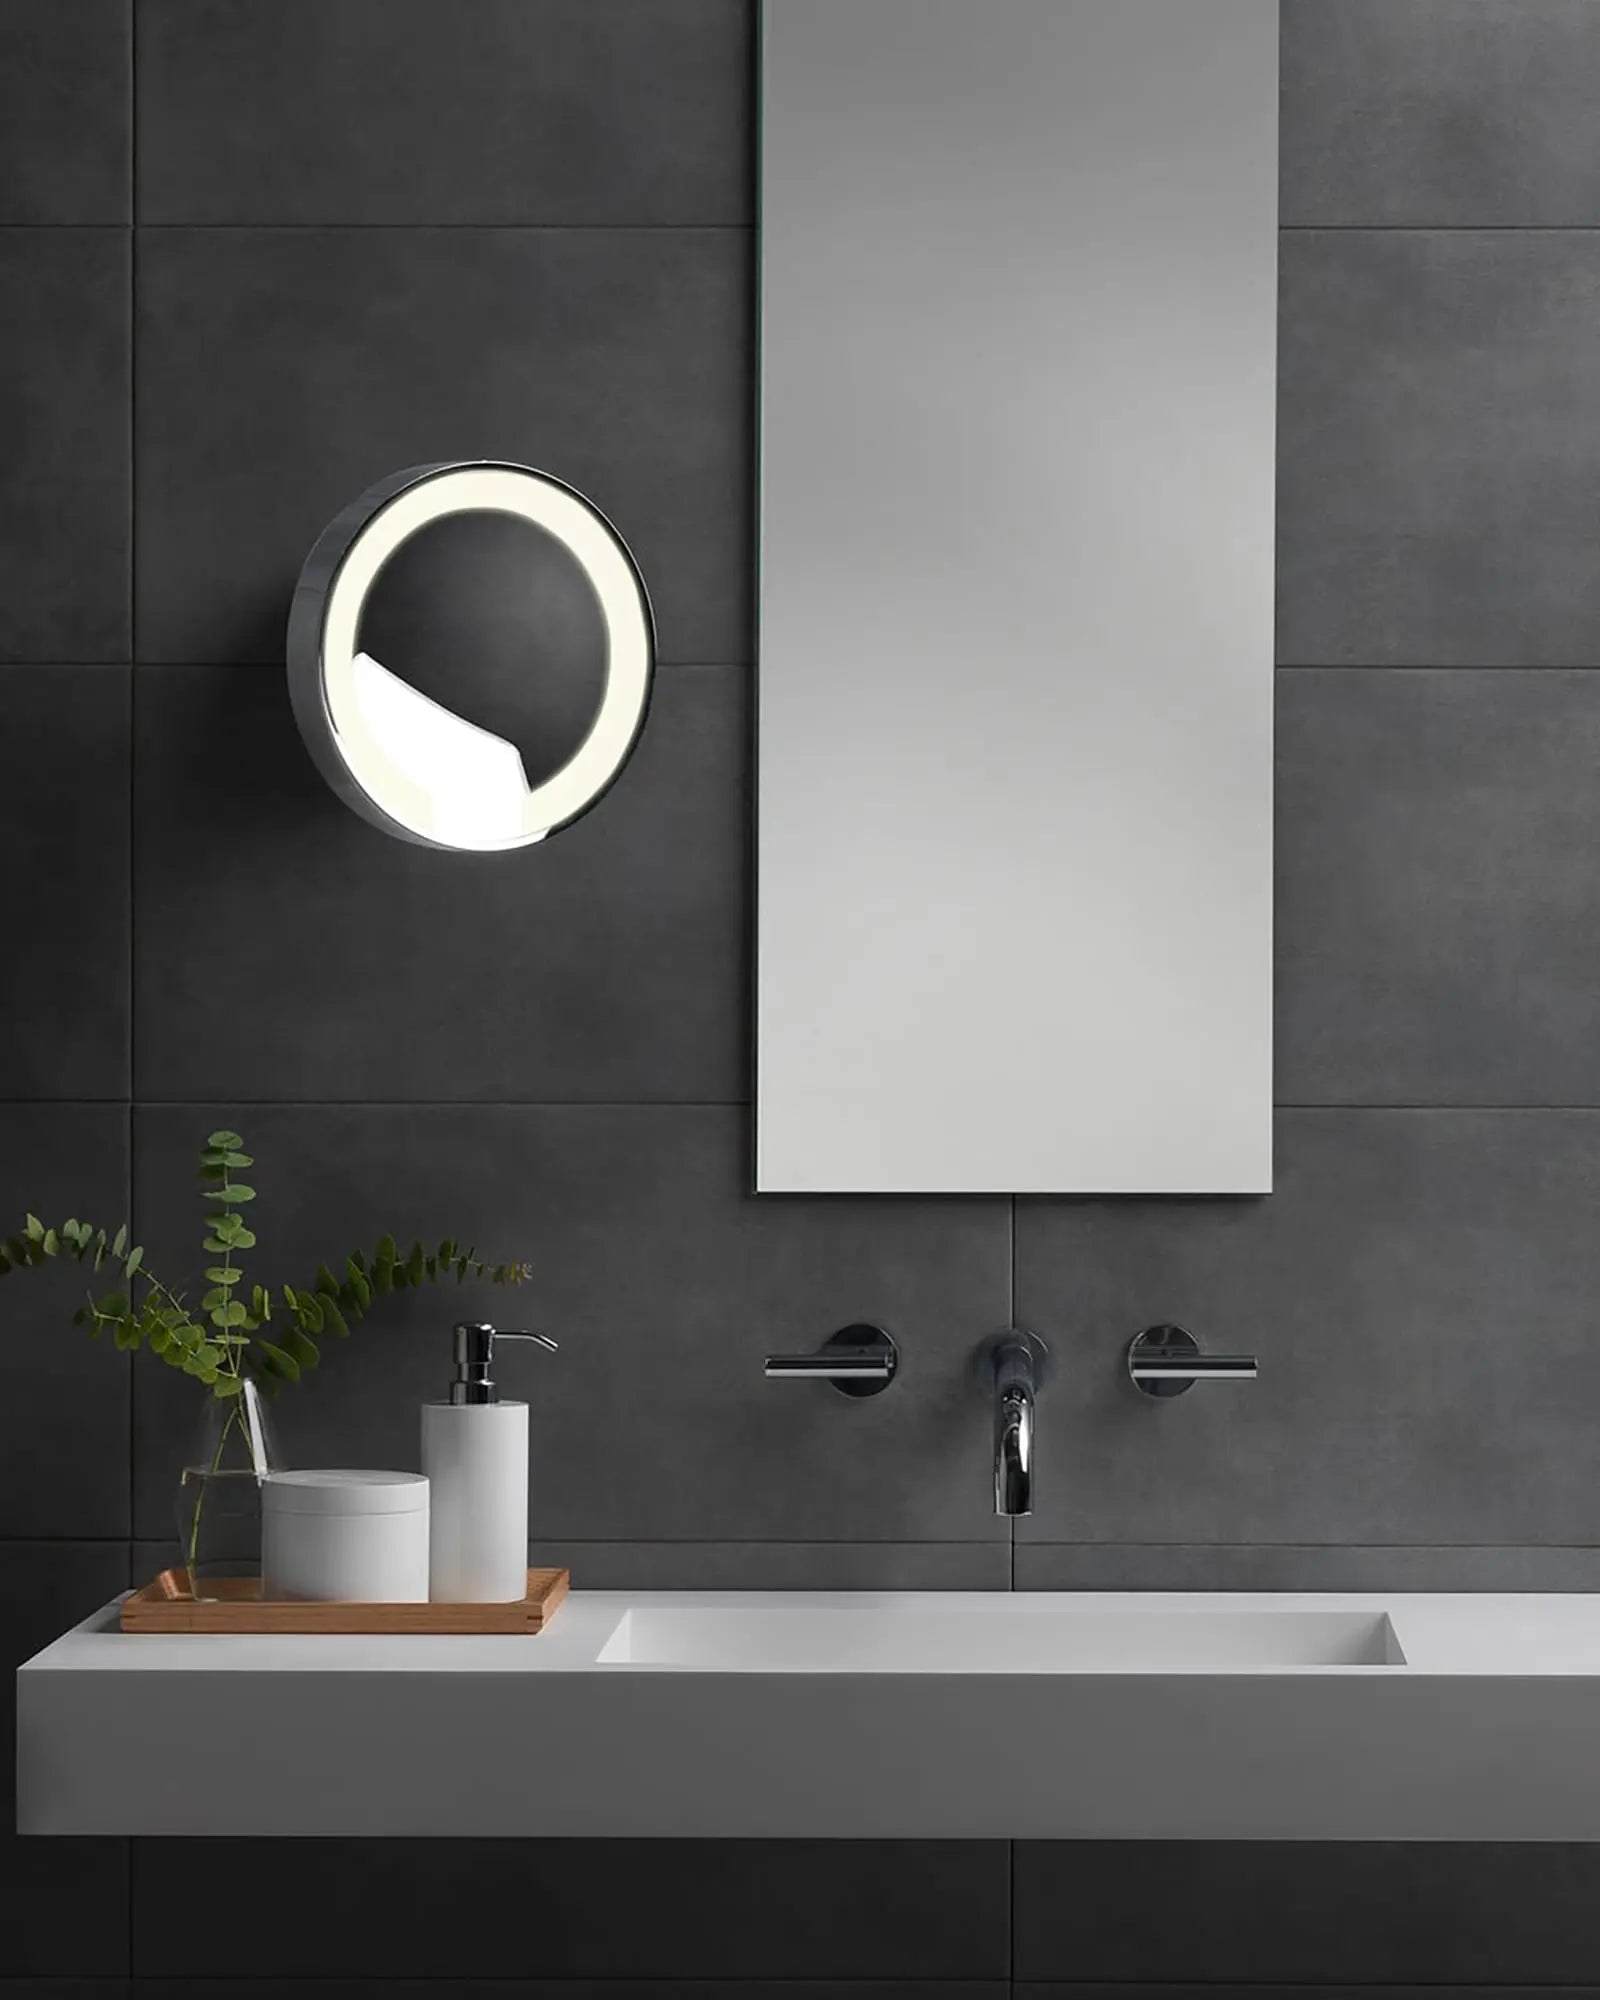 Catena LED adjustable round bathroom magnifying mirror with LED light on the mirror side